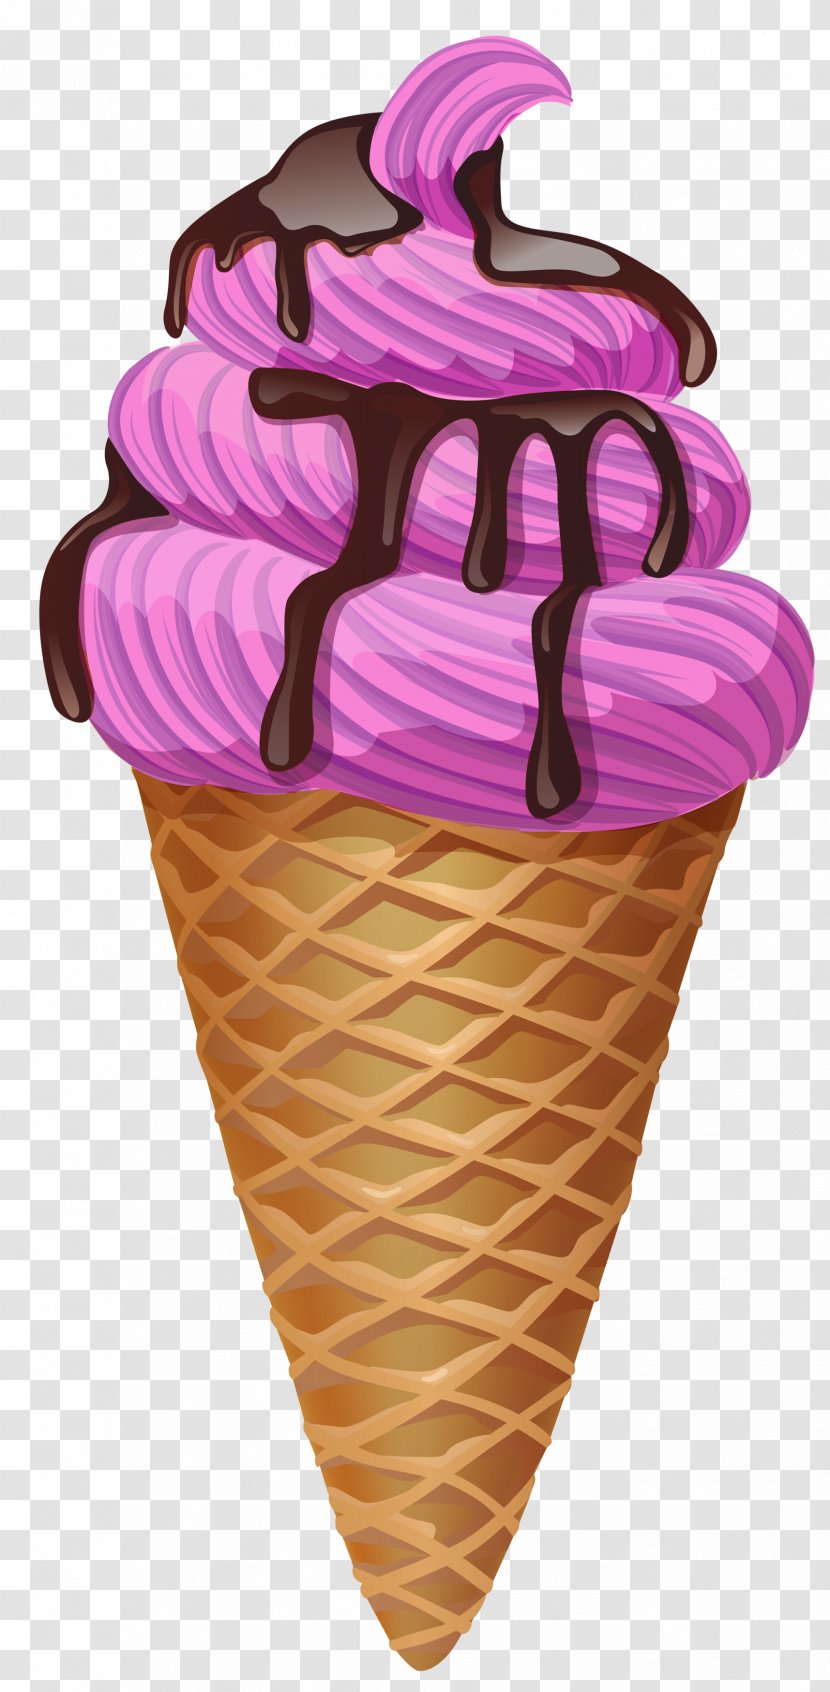 Ice Cream Cone Chocolate Sundae - Dairy Product - Transparent Pink Picture Transparent PNG